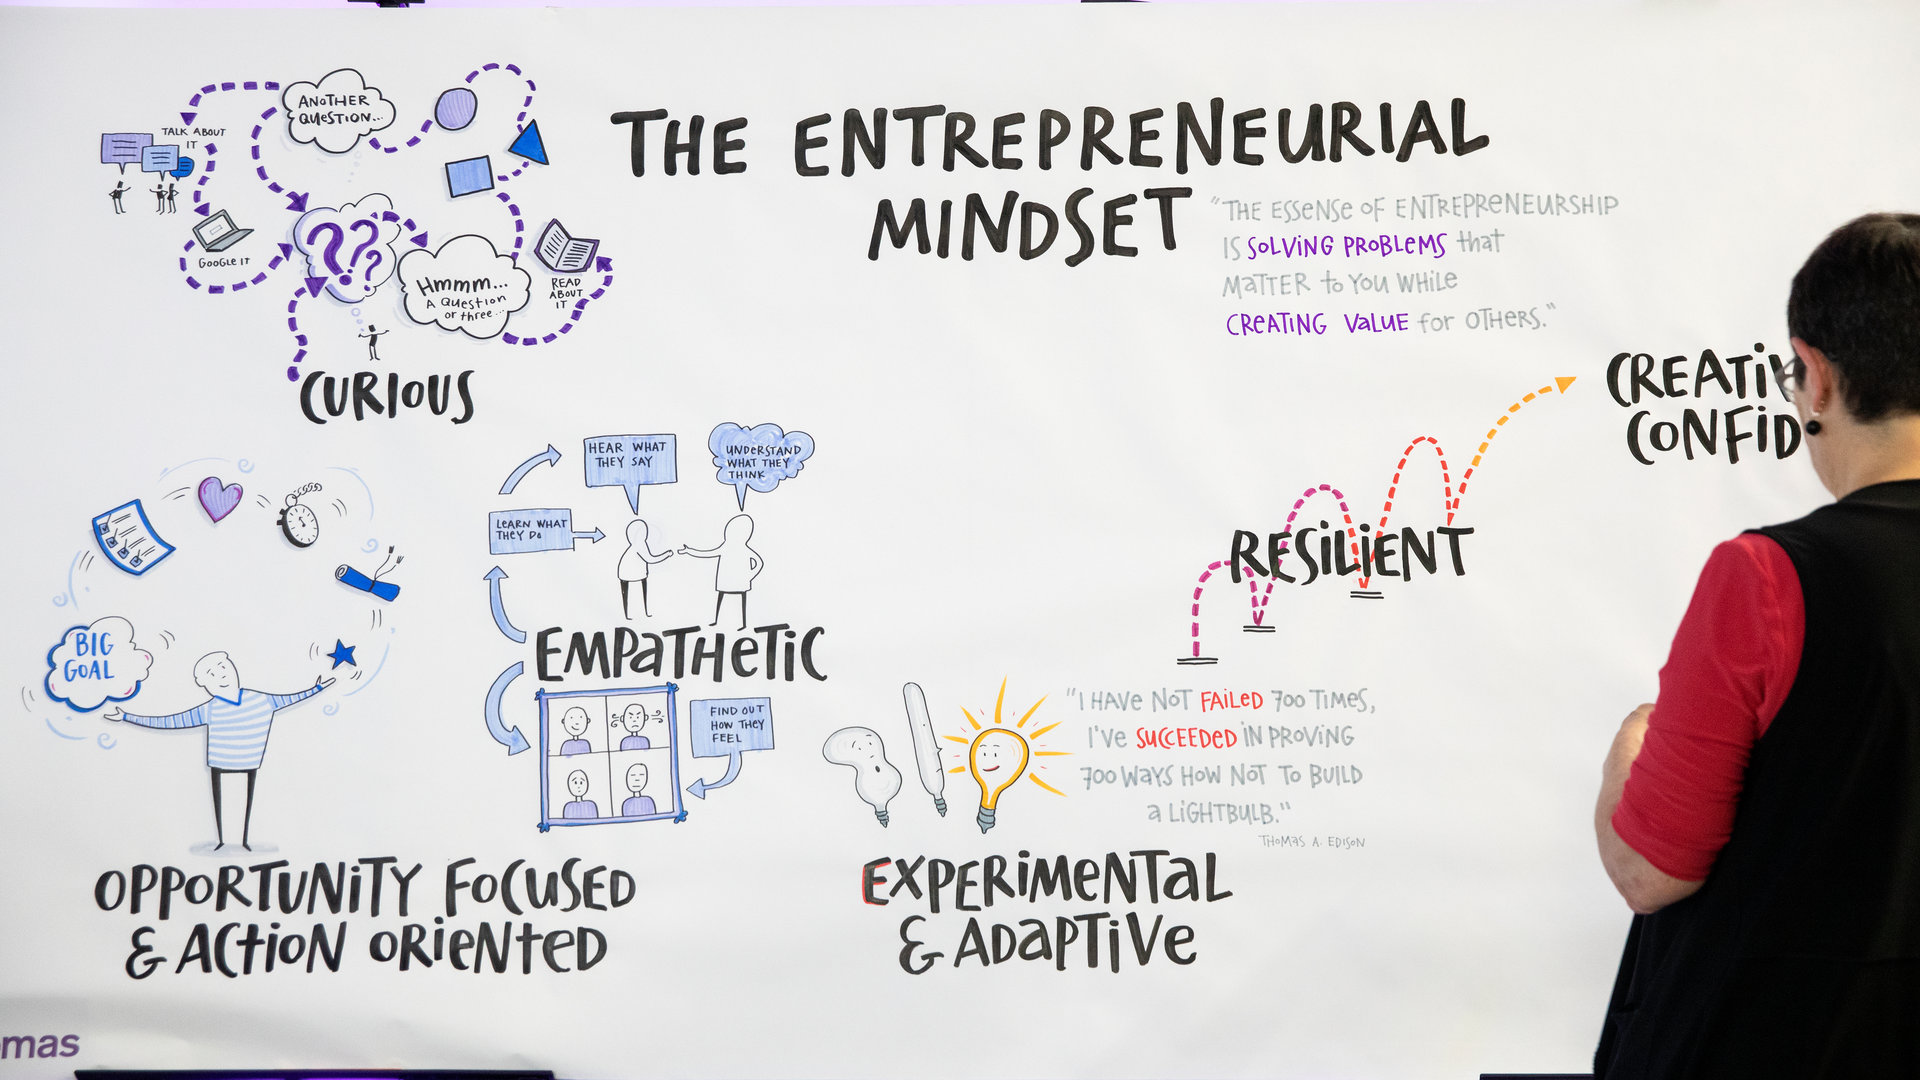 a whiteboard is adorned with quotes and doodles related to "The Entrepreneurial Mindset"